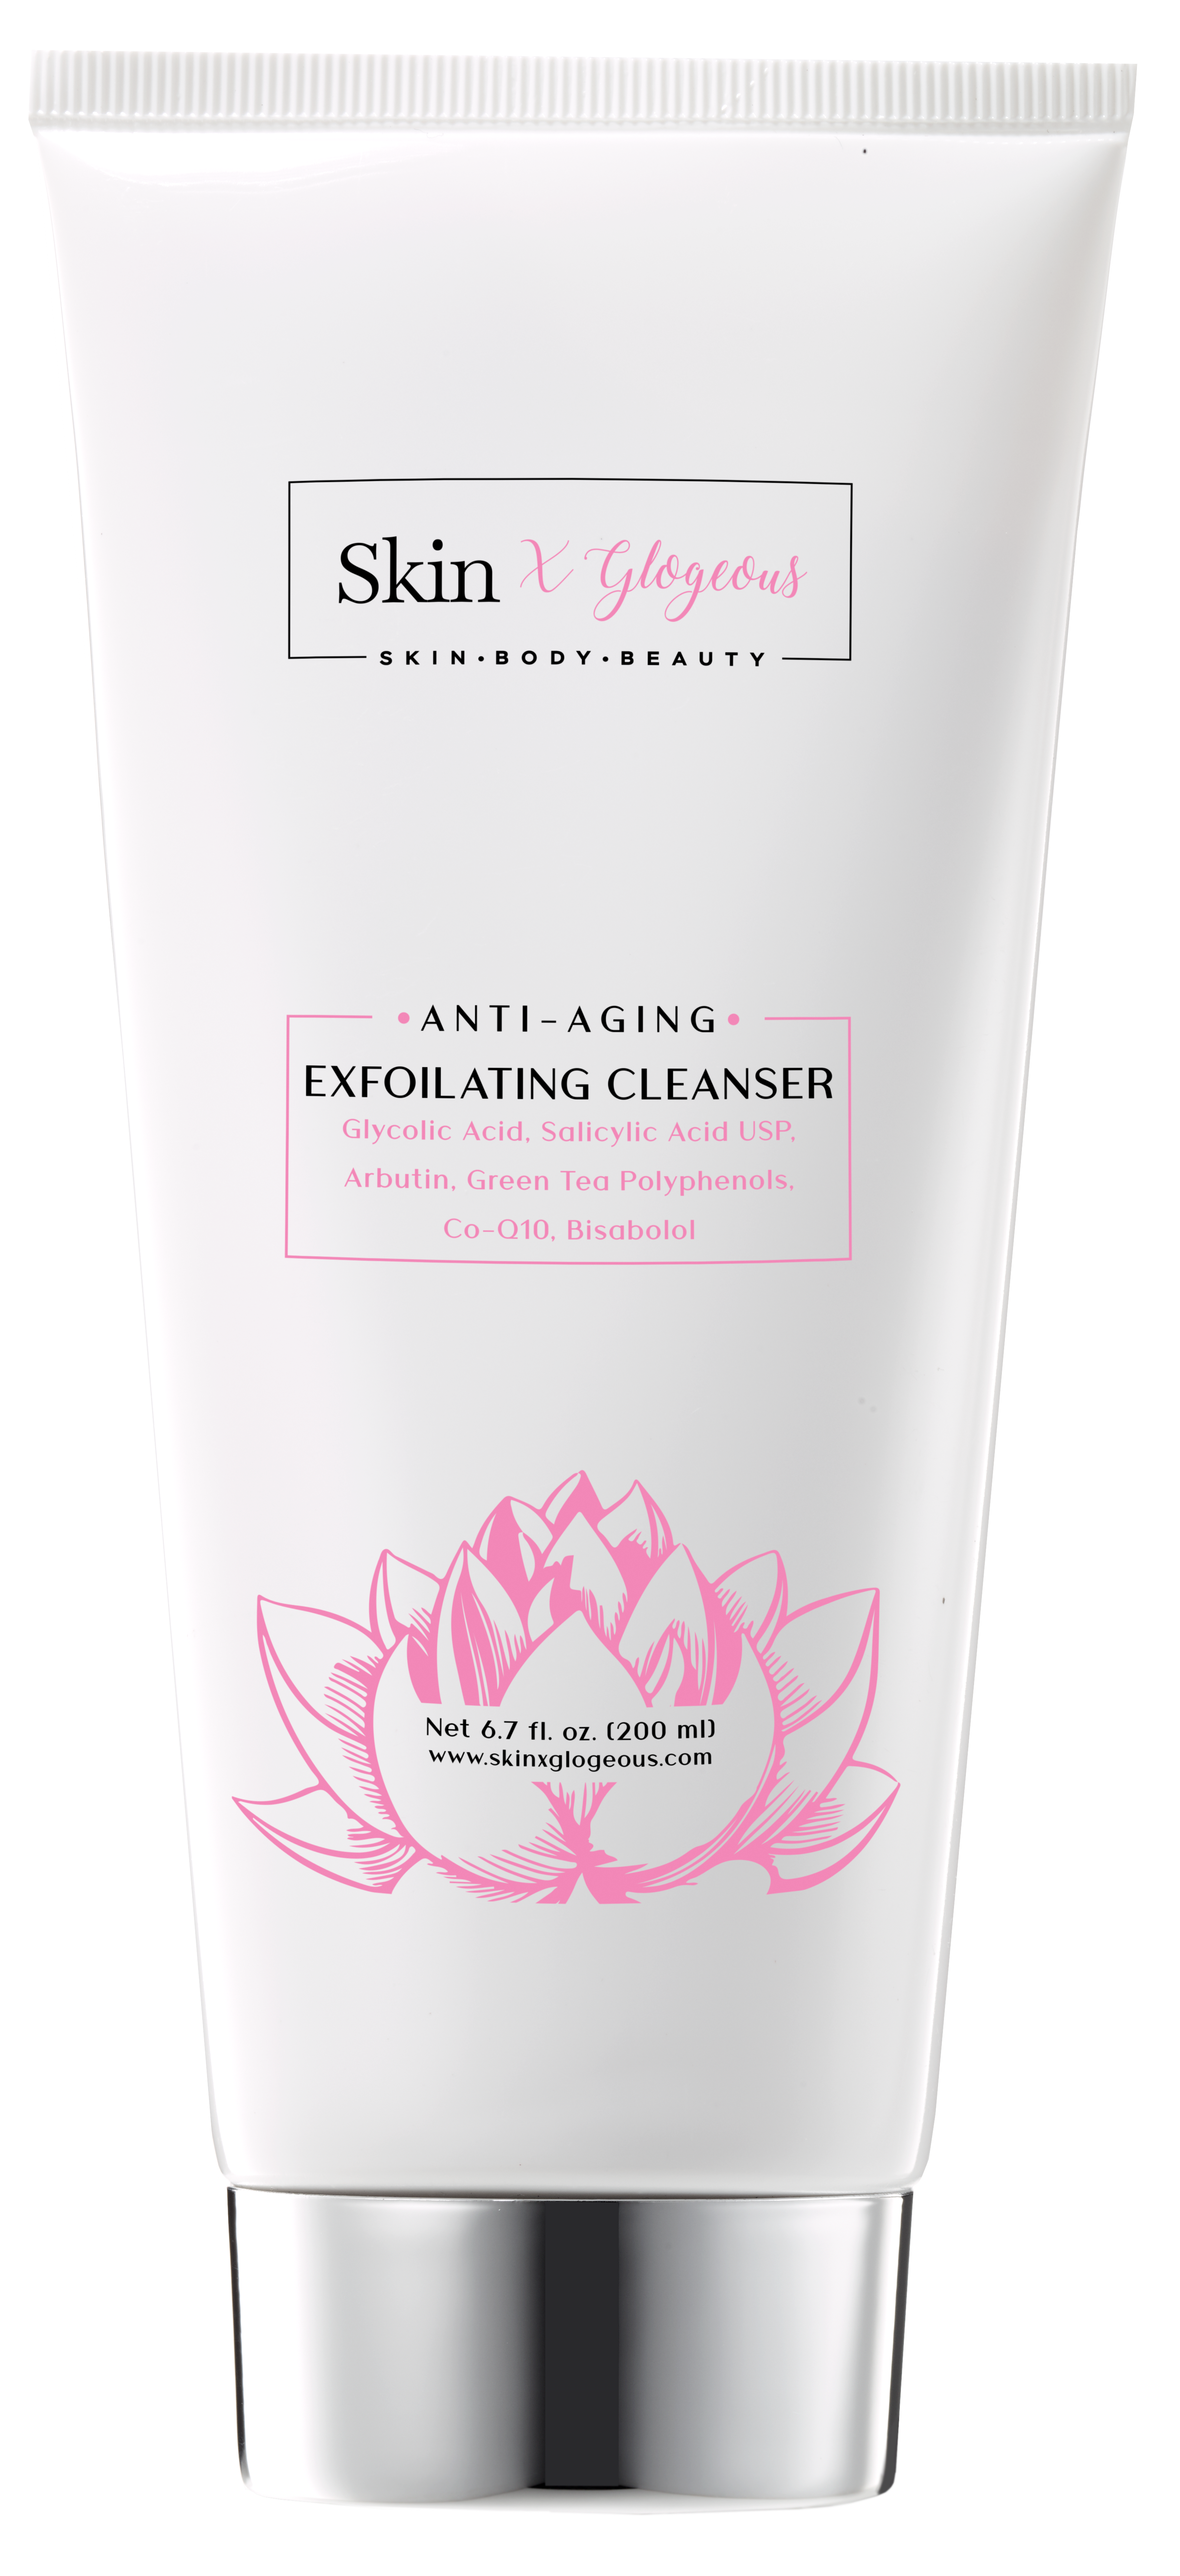 Anti-Aging Exfoilating Cleanser